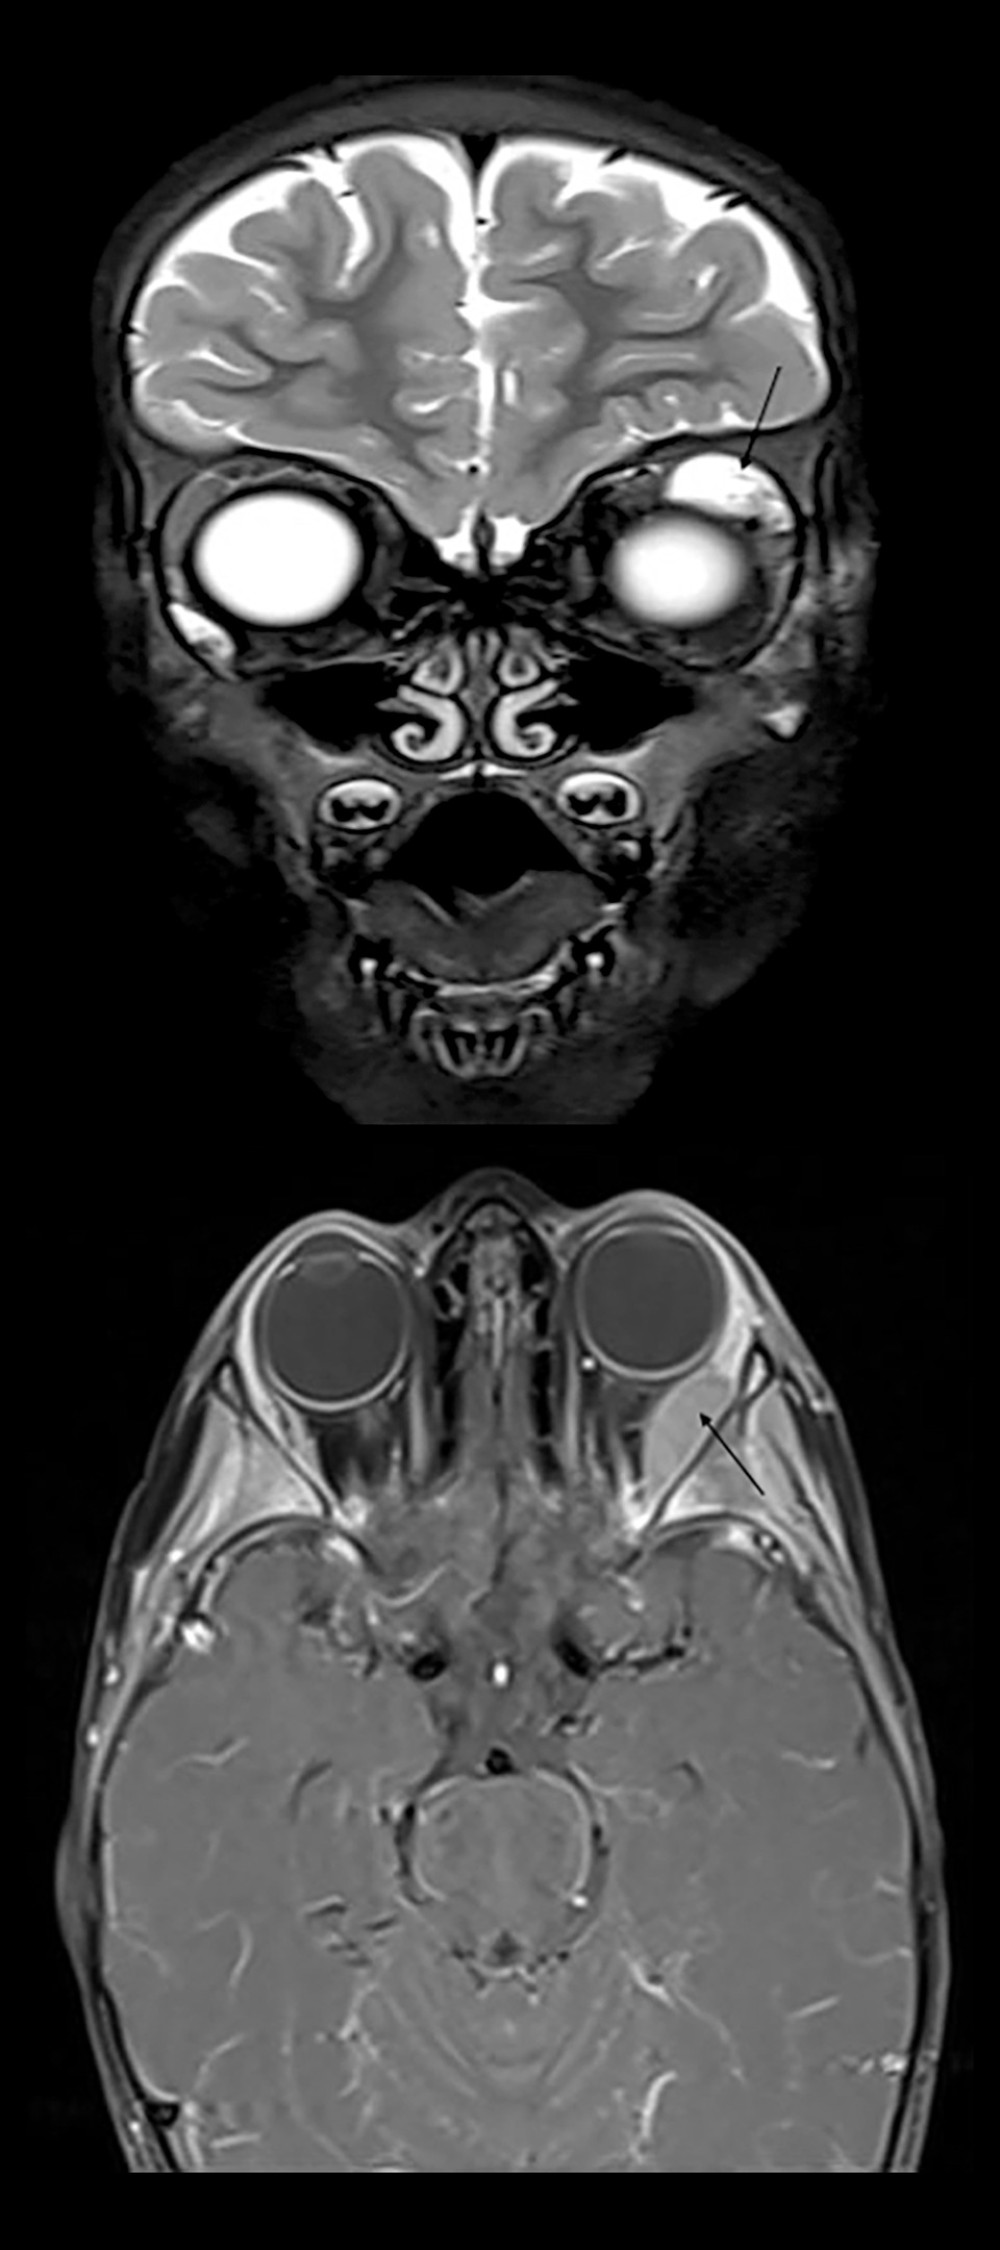 Magnetic resonance imaging with contrast. Bilateral subperiosteal heterogeneous collections were visible on an MRI with contrast: a large collection in the superolateral wall of the left orbit (2×0.8×2.1 cm) and a small collection in the inferolateral wall of the right orbit (1×0.6 cm). Both collections had intermediate-to-high T1 signal intensities and high T2 signal intensities. Additionally, the sphenoid and lateral orbital walls have both had bilateral osseous changes.